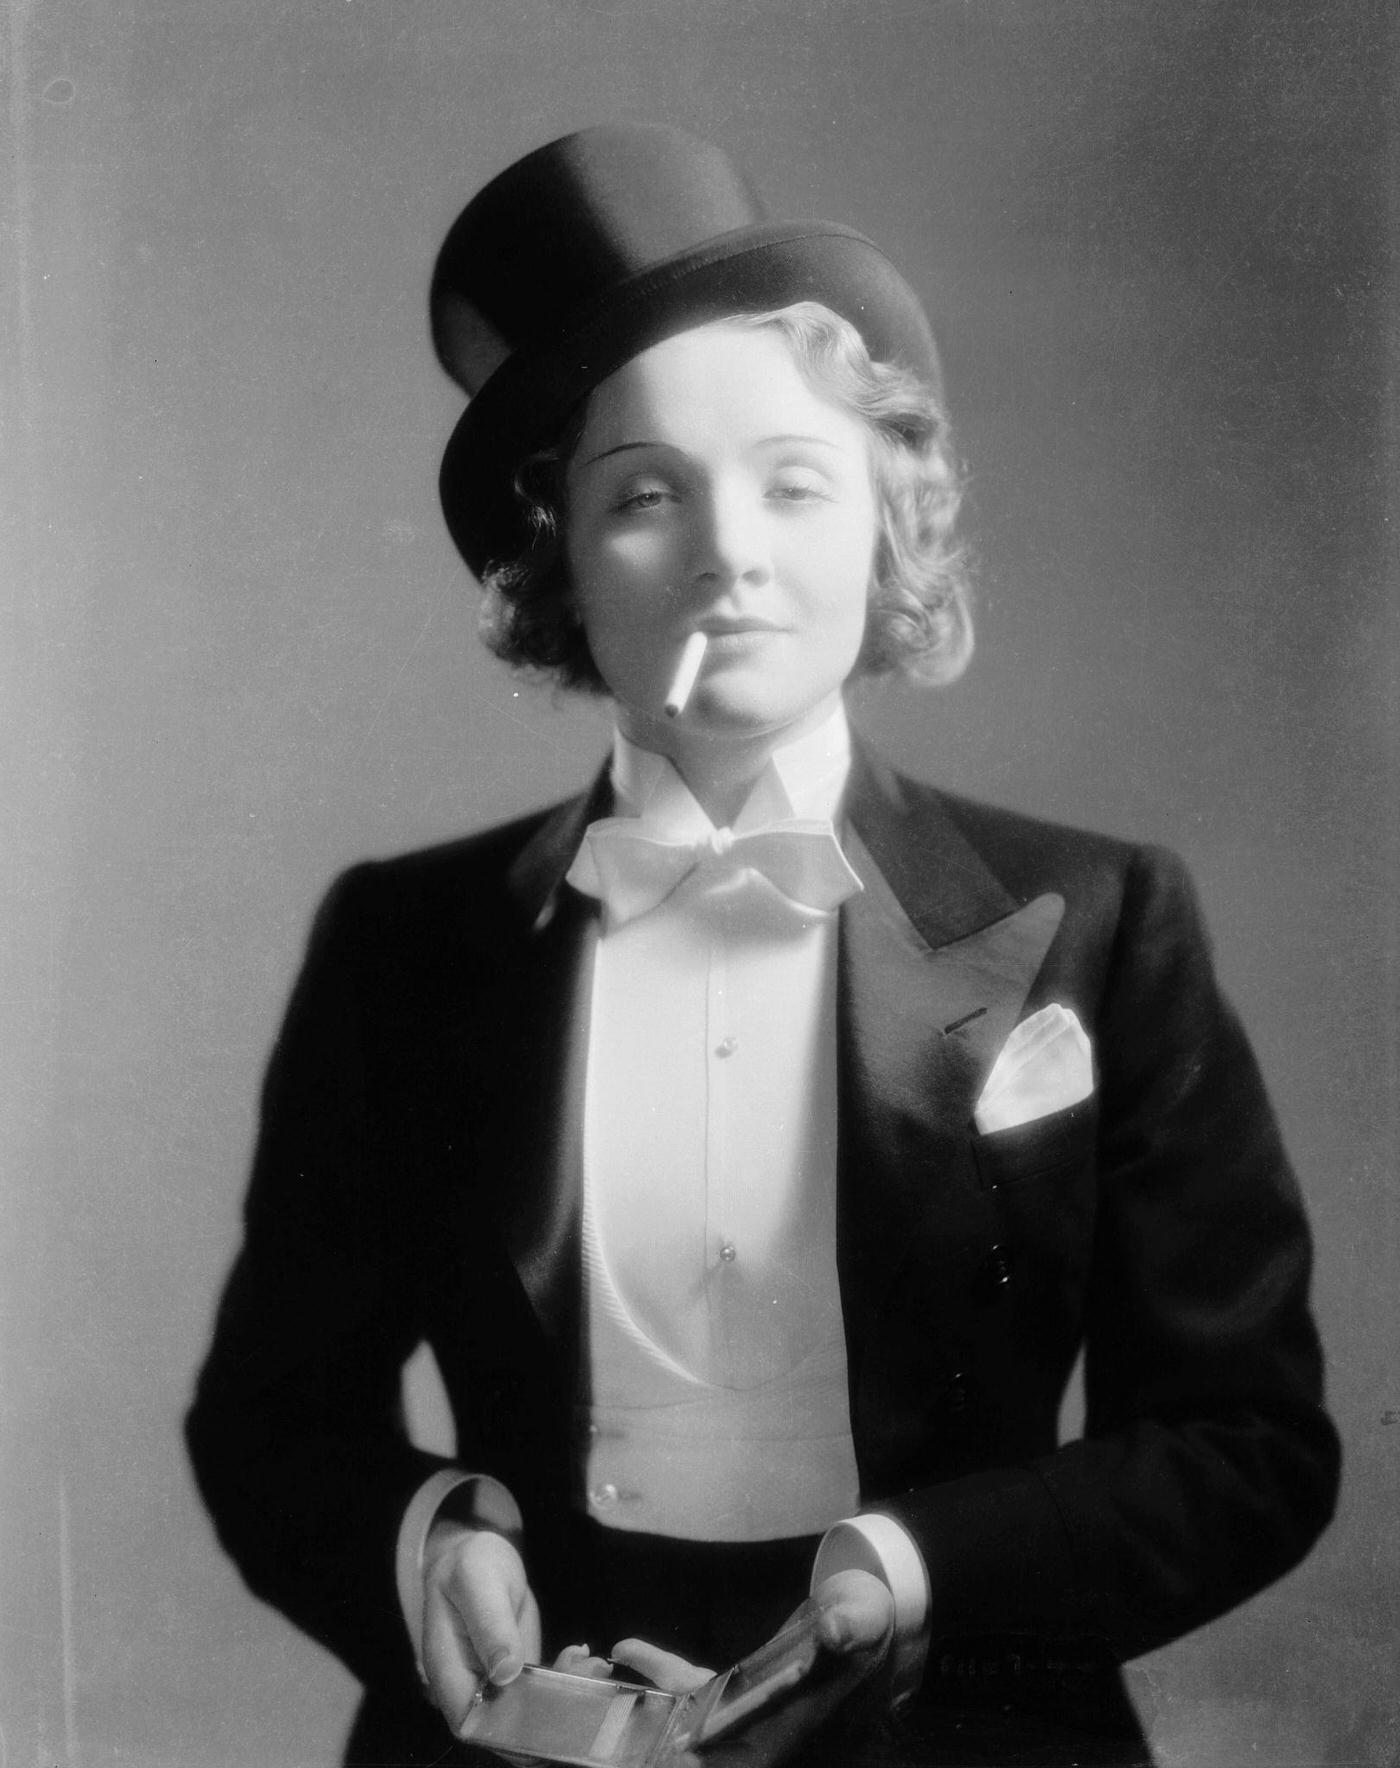 Marlene Dietrich makes her Hollywood film debut as Amy Jolly, dressed in a tuxedo in 'Morocco,' directed by Josef von Sternberg.